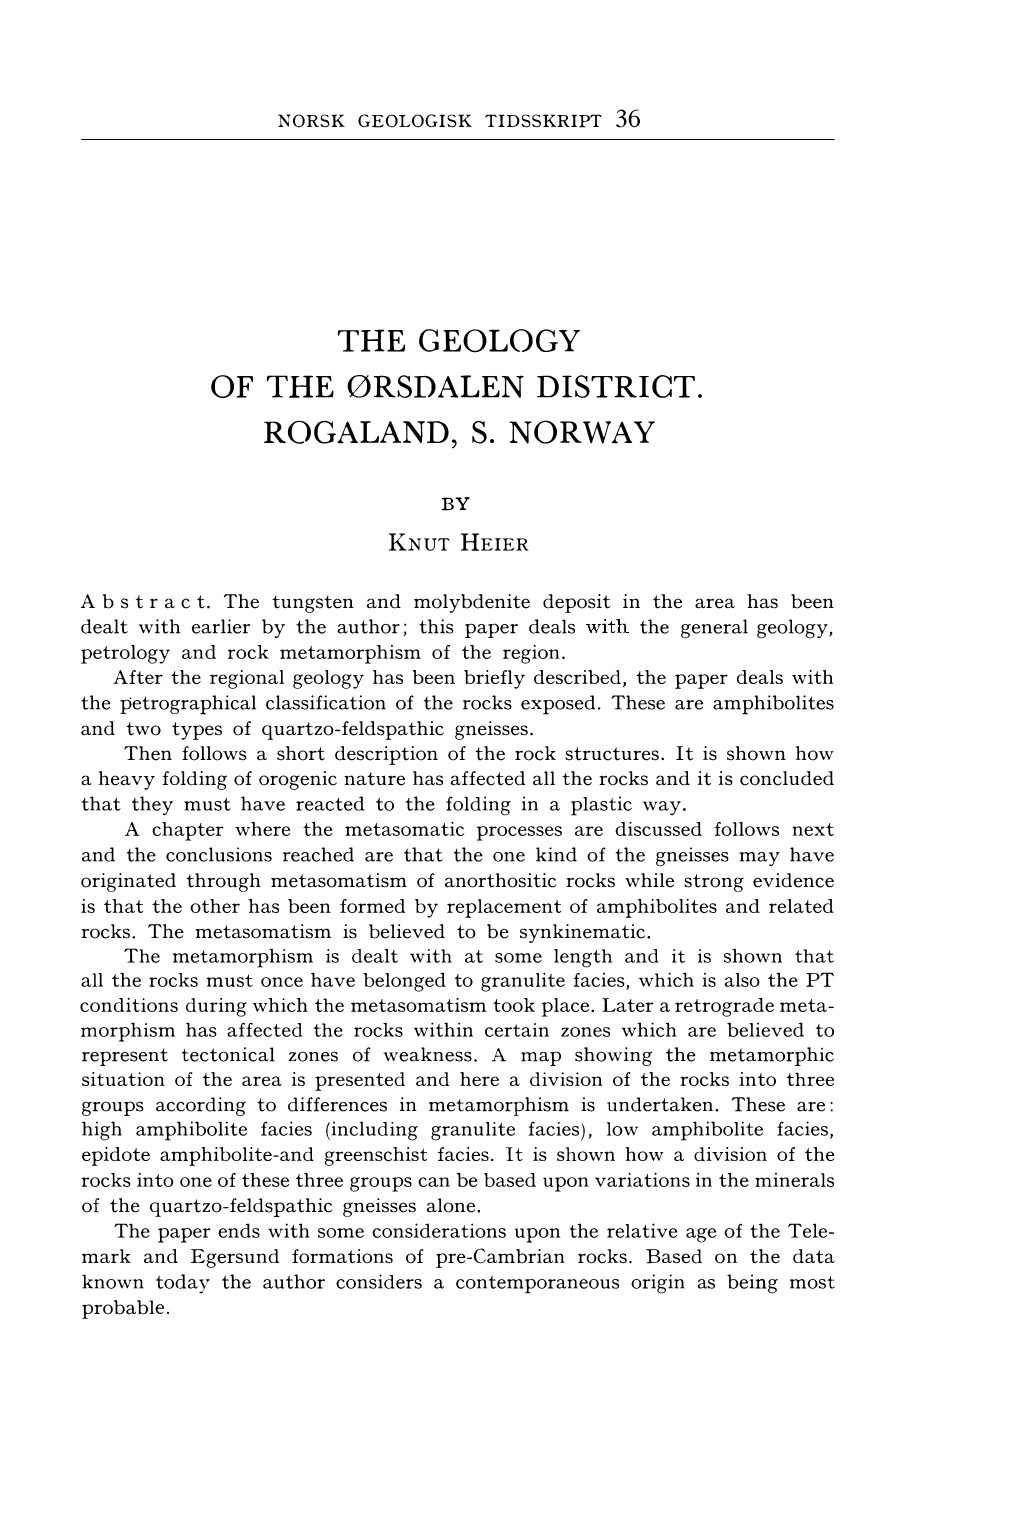 36 the Geology of the Ørsdalen District